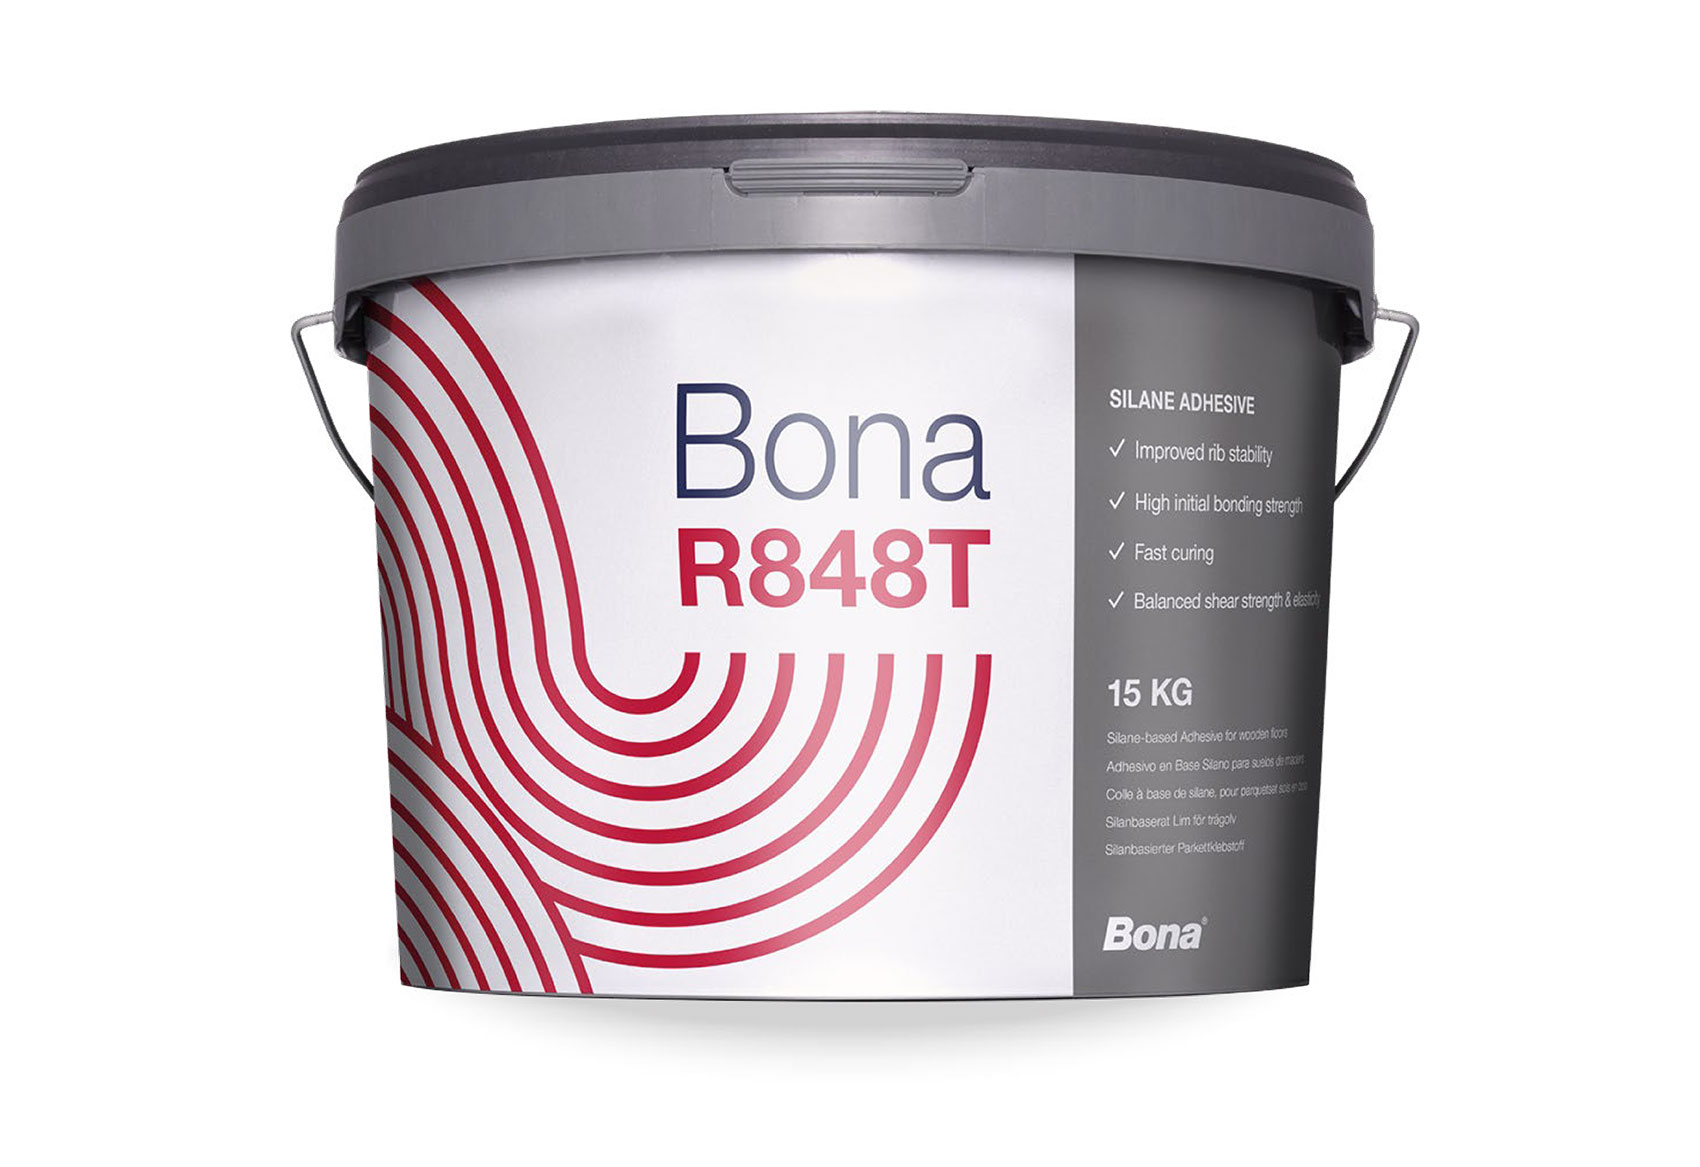 Bona R848T Adhesive available in 15kg Tub